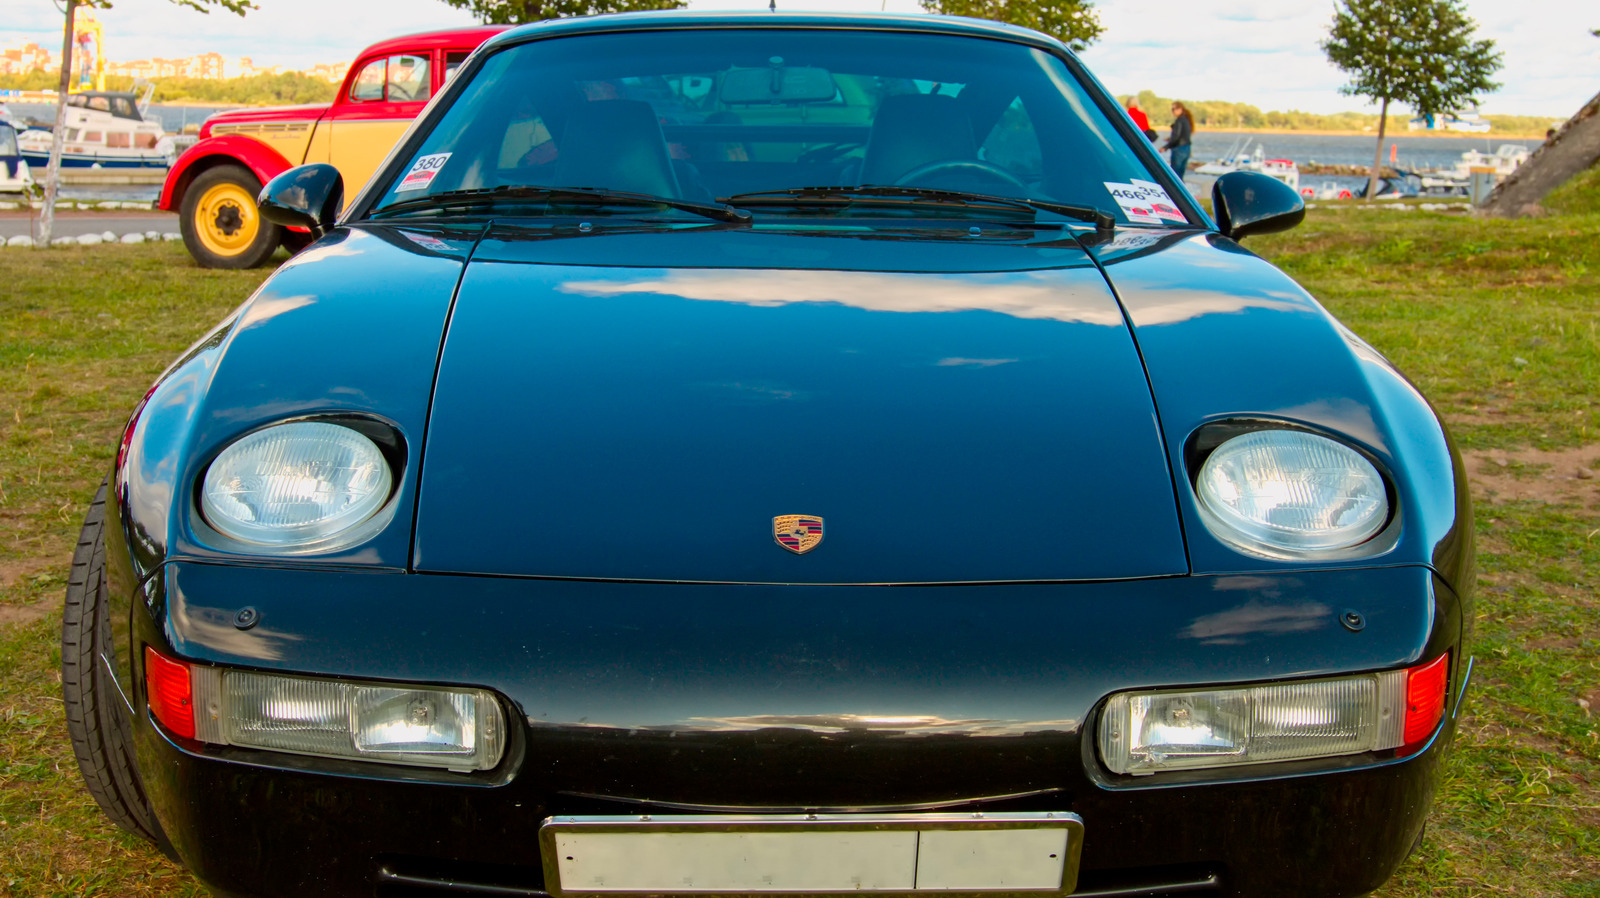 Here's What Happened To The Infamous Porsche 928 The Patagonia Special